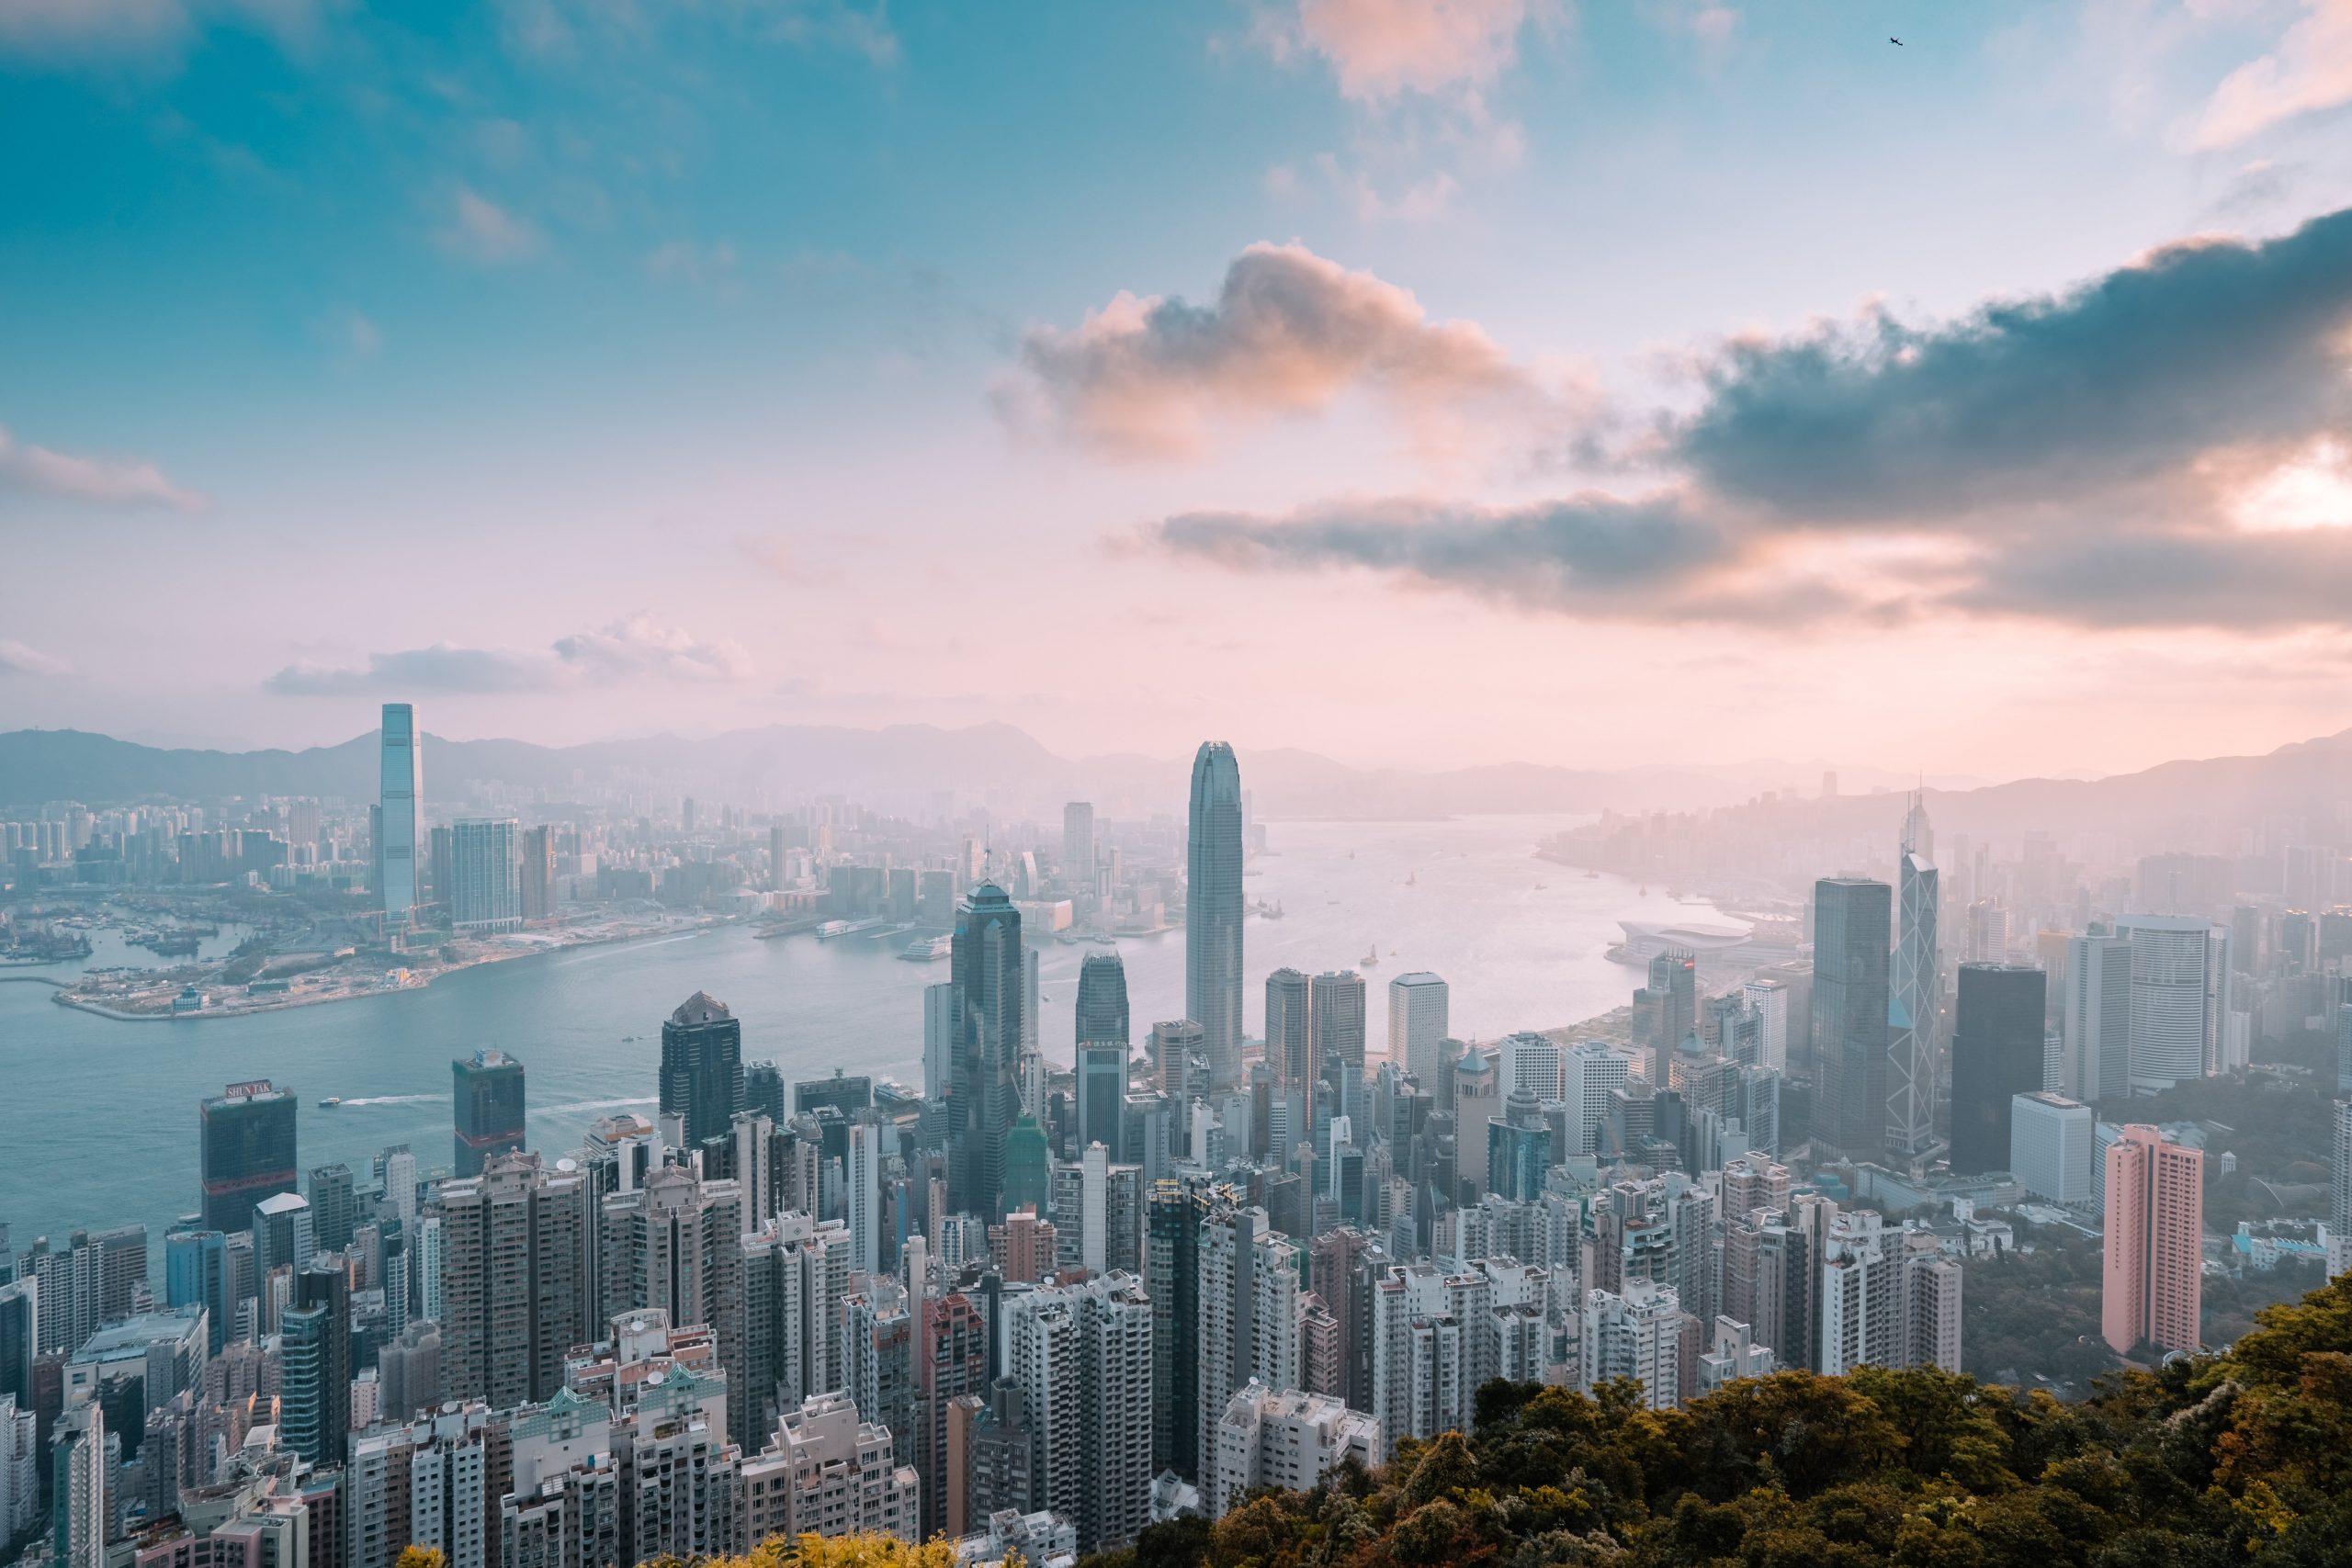 We’re attracting more Southeast Asia unicorns to list in Hong Kong, says Christina Bao of HKEX